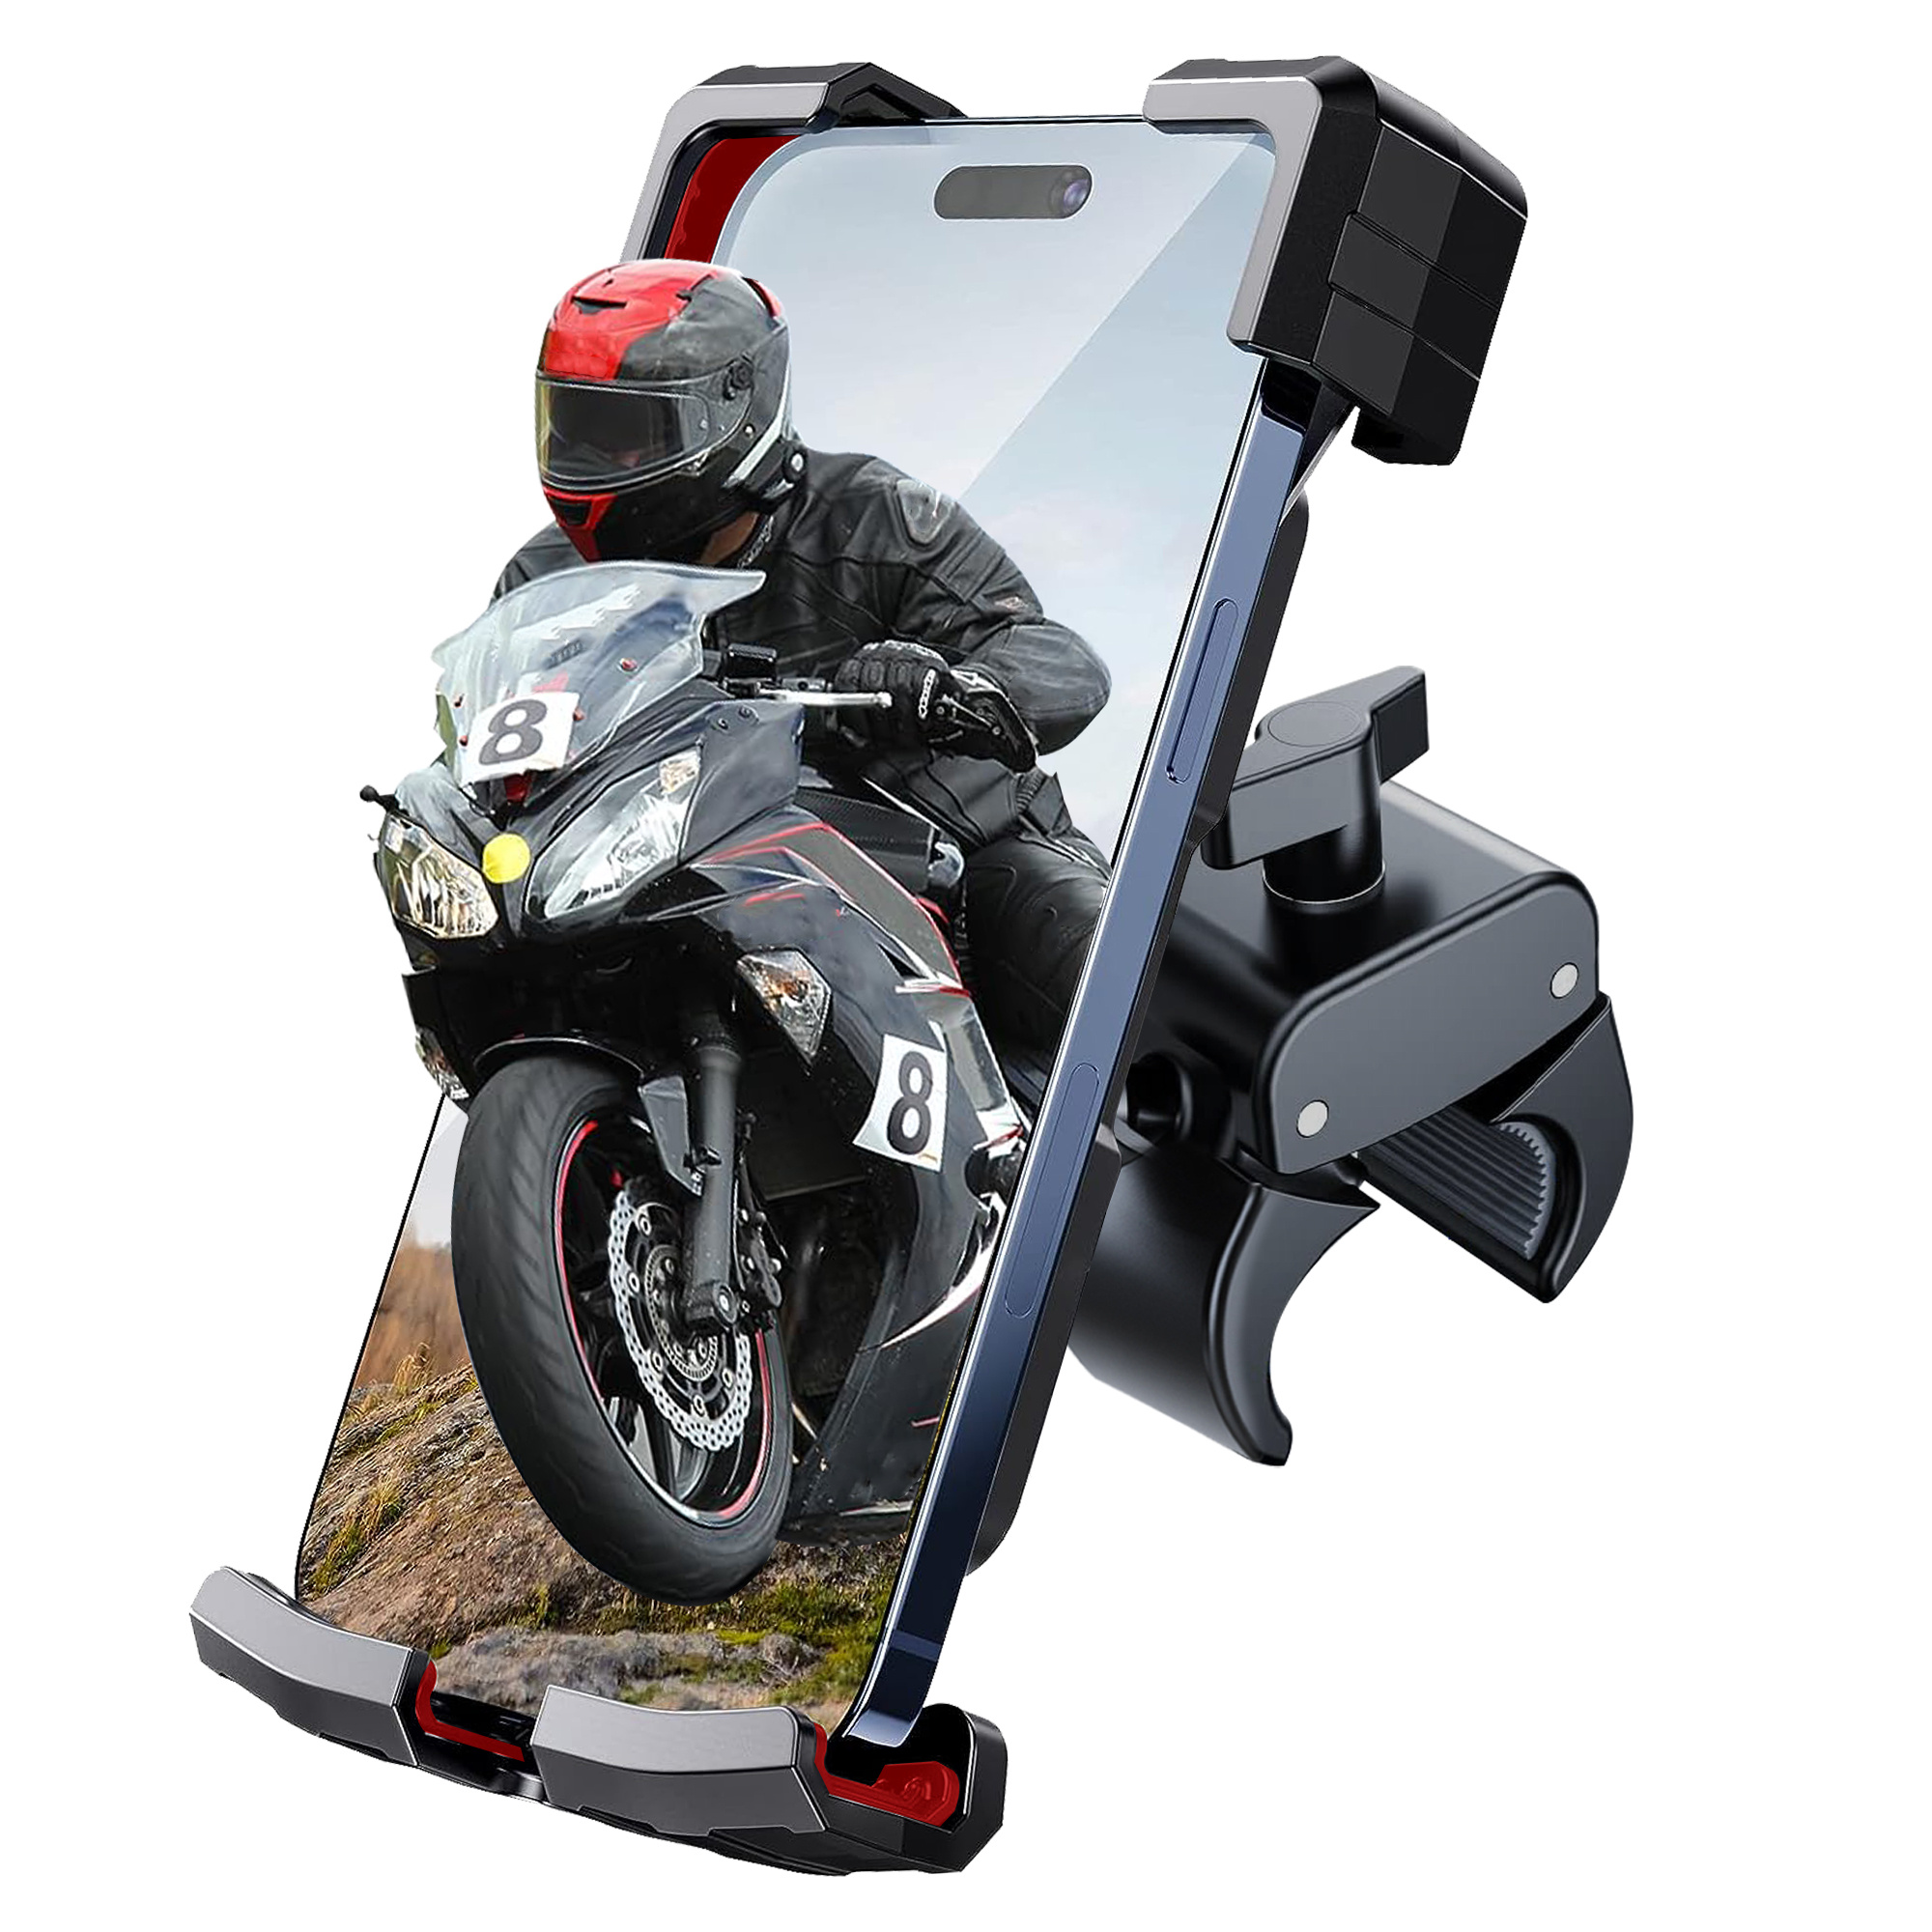 Bike & Motorcycle Phone Mount - For iPhone 14 (13, Xr, SE, Plus/Max),  Samsung Galaxy S22 or any Cell Phone - Universal Handlebar Holder for ATV